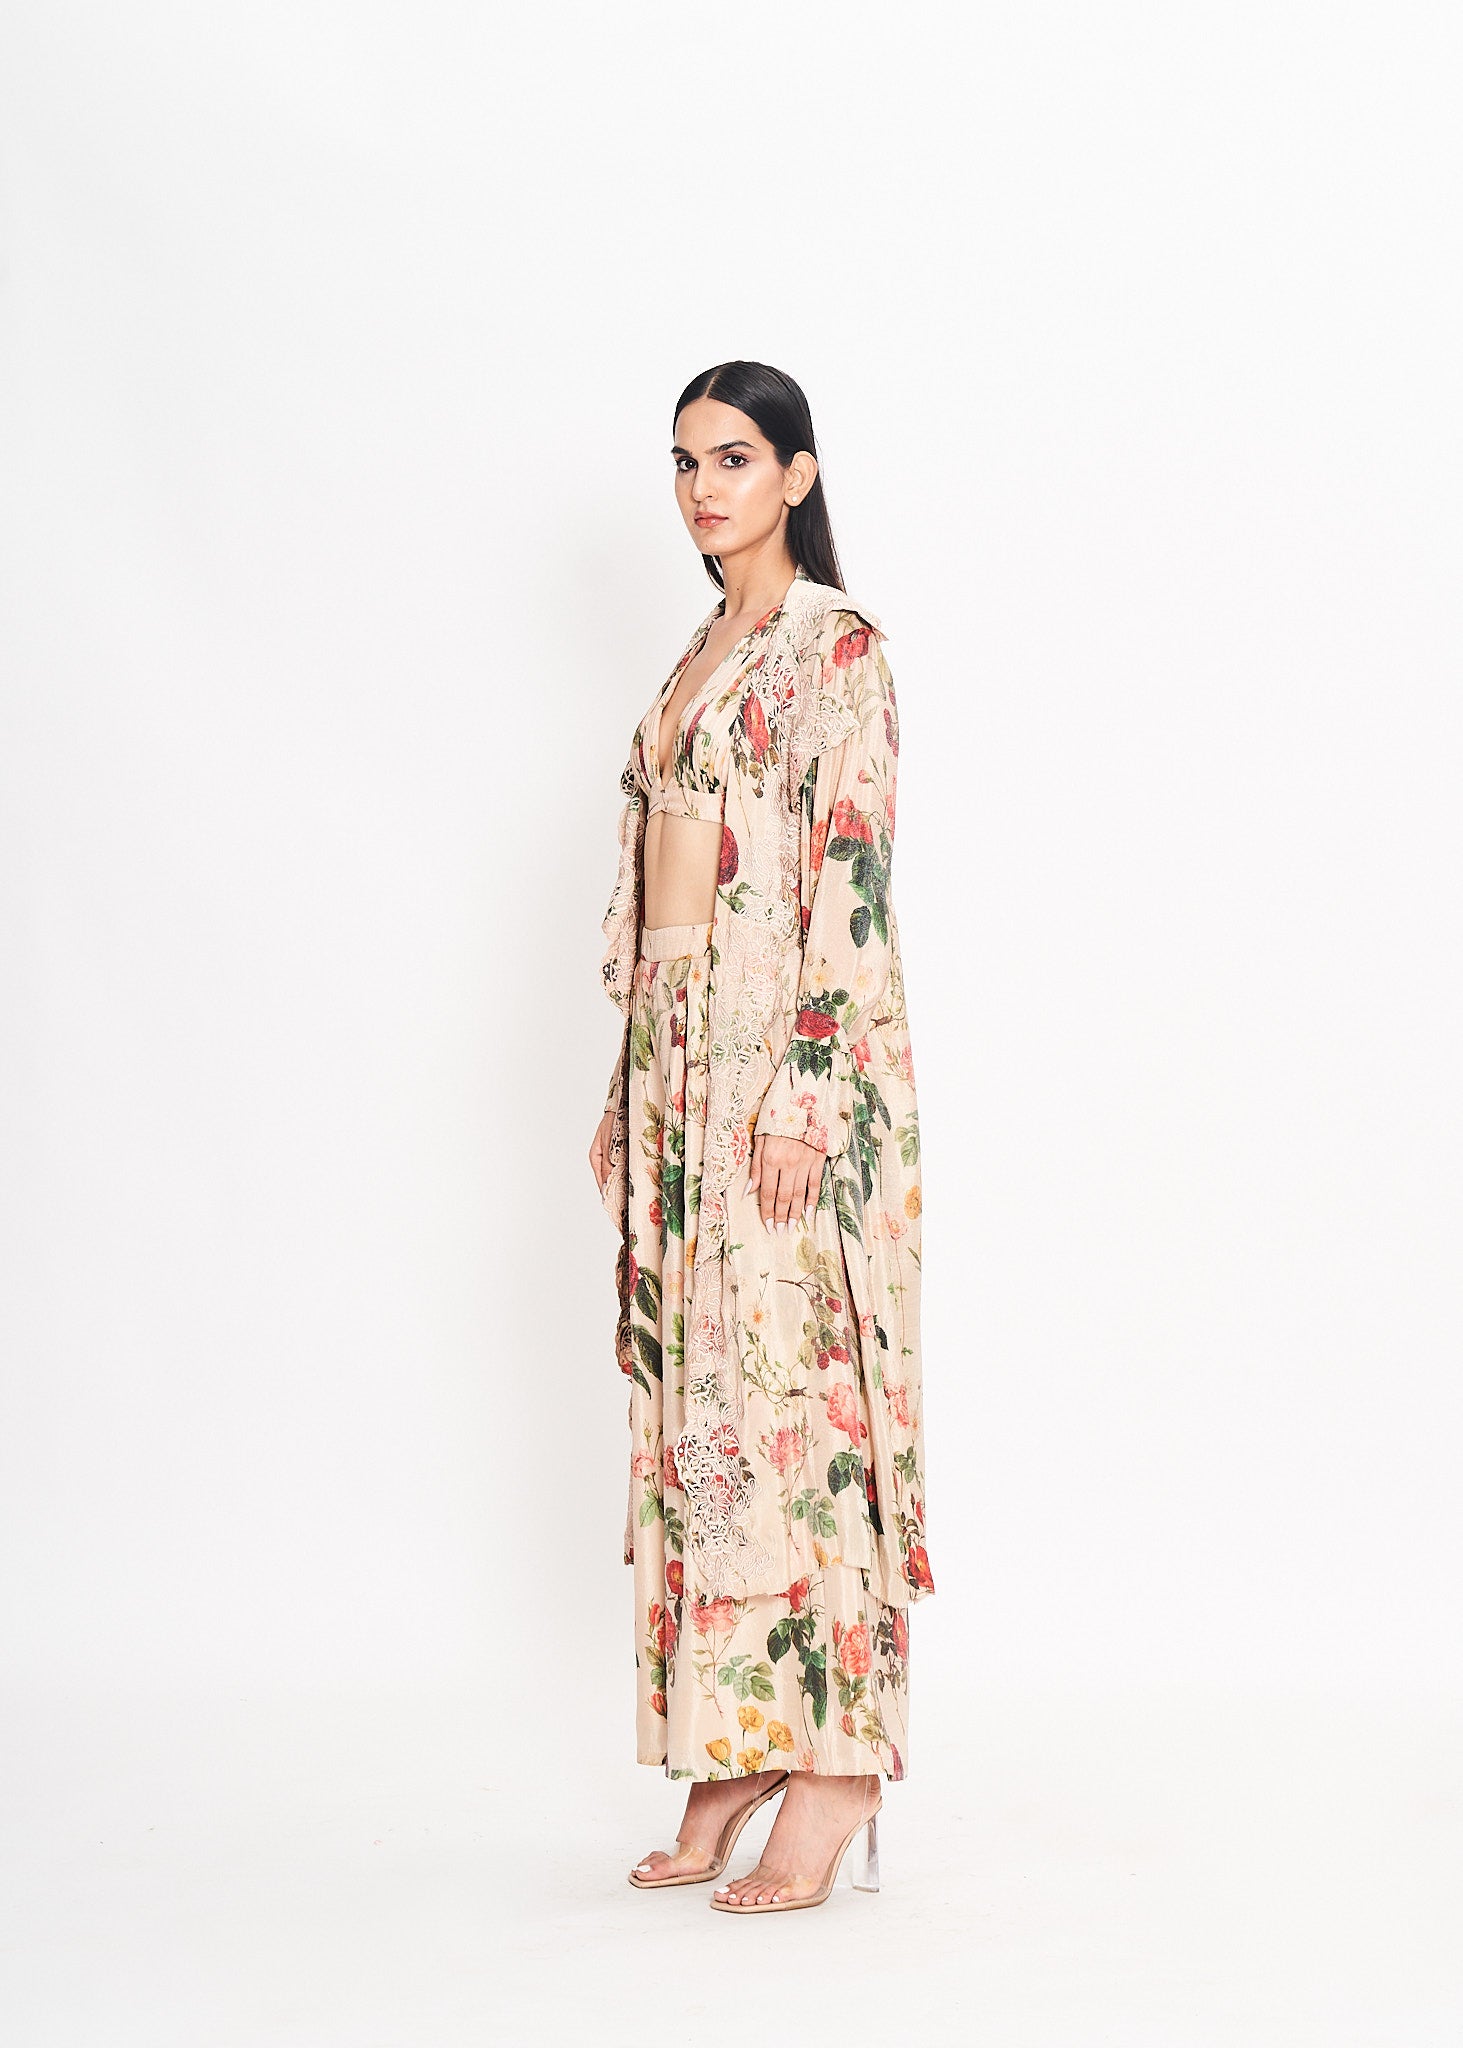 Fleur and Foliage Trench Coat